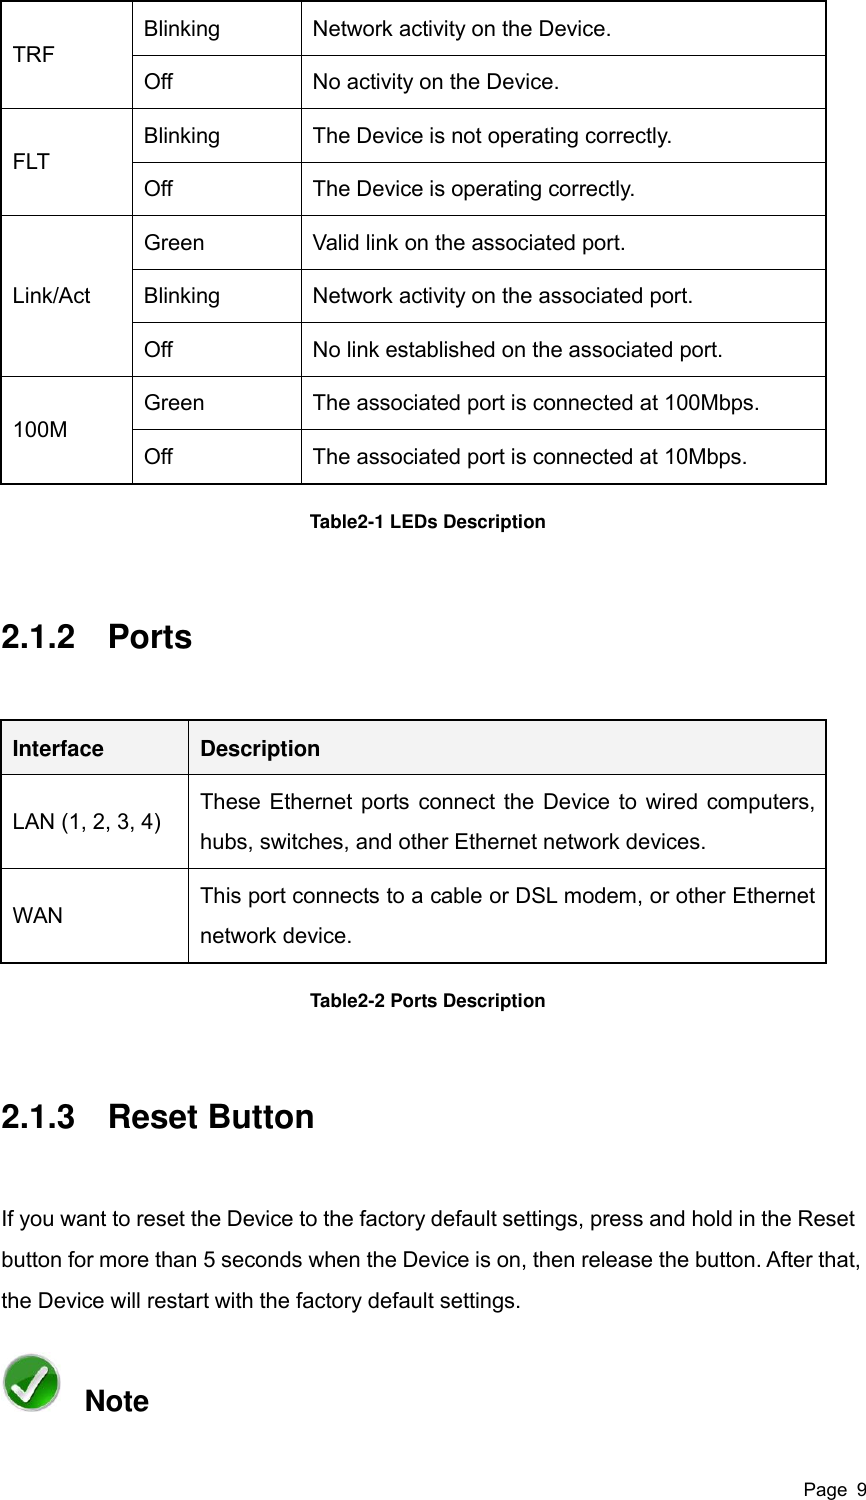  Page  9 TRF Blinking Network activity on the Device. Off No activity on the Device. FLT Blinking The Device is not operating correctly.   Off The Device is operating correctly. Link/Act Green Valid link on the associated port. Blinking   Network activity on the associated port. Off No link established on the associated port. 100M Green The associated port is connected at 100Mbps. Off The associated port is connected at 10Mbps. Table2-1 LEDs Description 2.1.2  Ports Interface Description LAN (1, 2, 3, 4) These Ethernet ports connect the Device to wired computers, hubs, switches, and other Ethernet network devices. WAN This port connects to a cable or DSL modem, or other Ethernet network device. Table2-2 Ports Description 2.1.3  Reset Button If you want to reset the Device to the factory default settings, press and hold in the Reset button for more than 5 seconds when the Device is on, then release the button. After that, the Device will restart with the factory default settings.   Note 